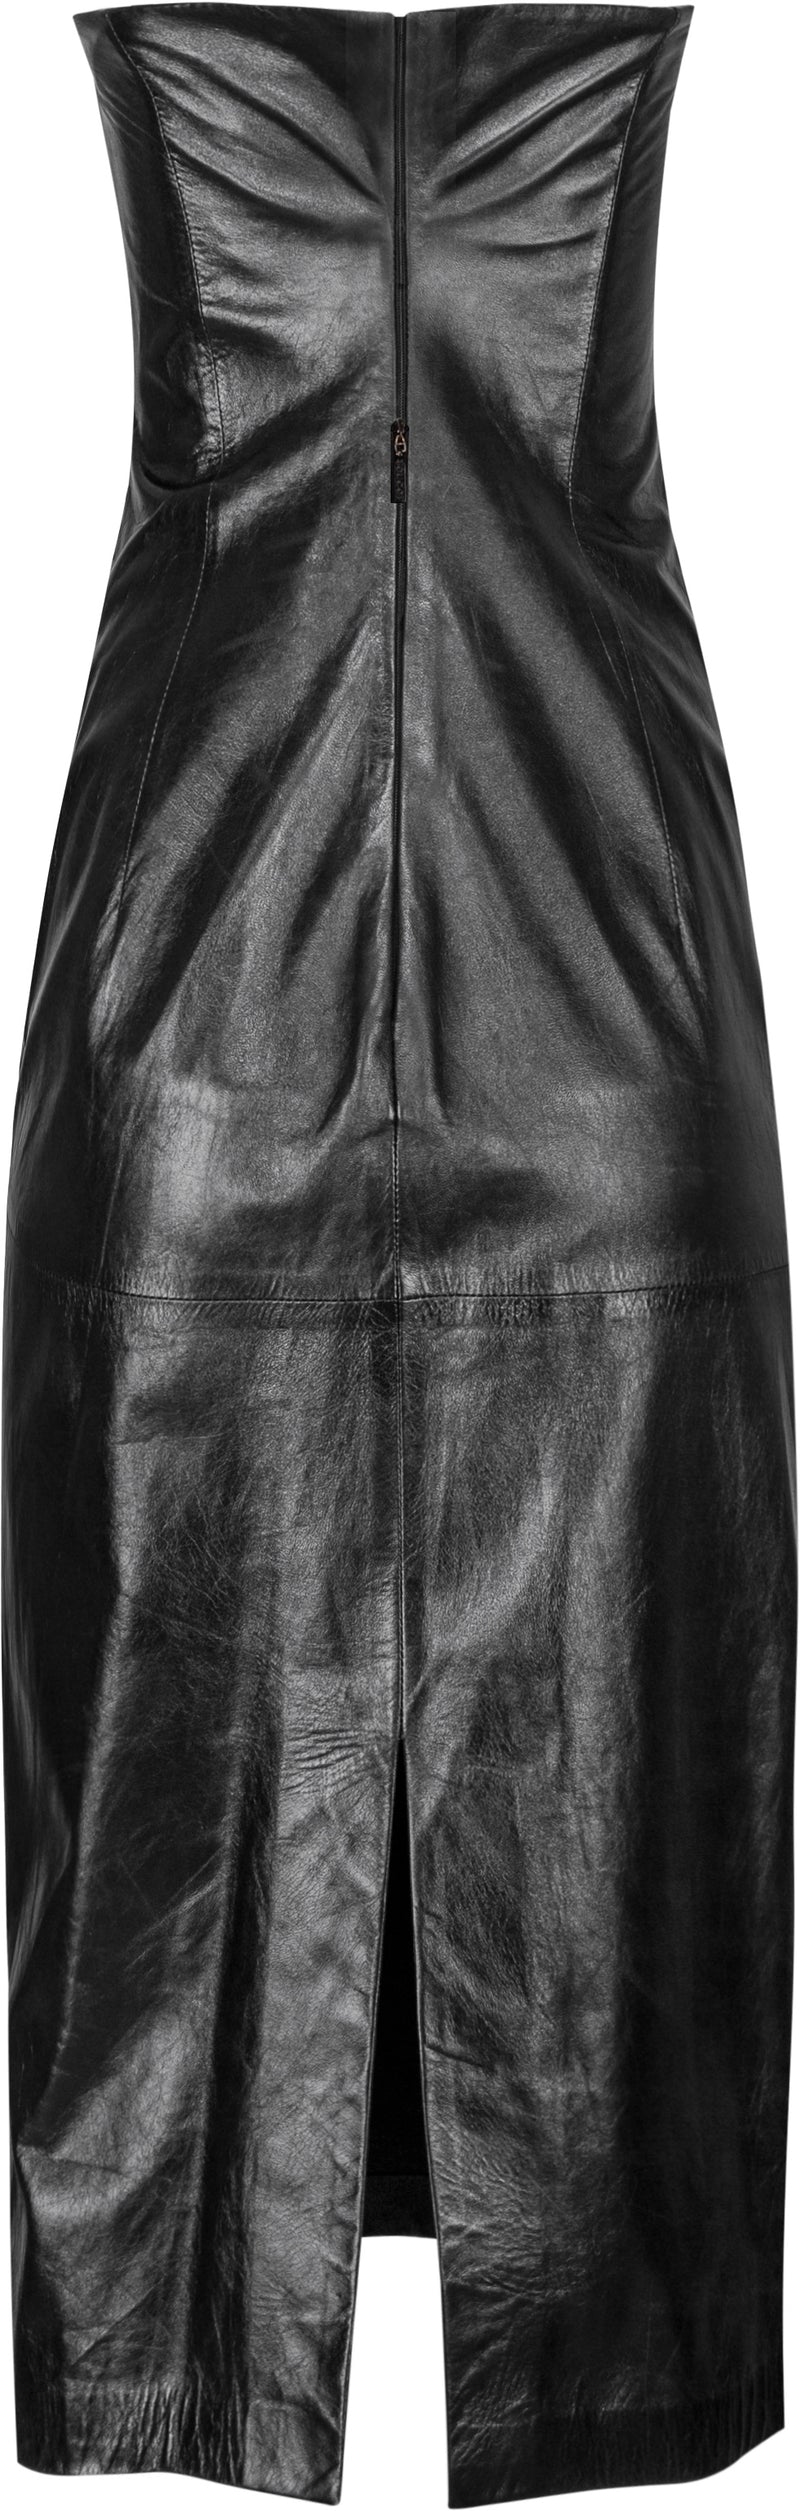 Gucci Spring 2001 Runway Leather Bustier Dress